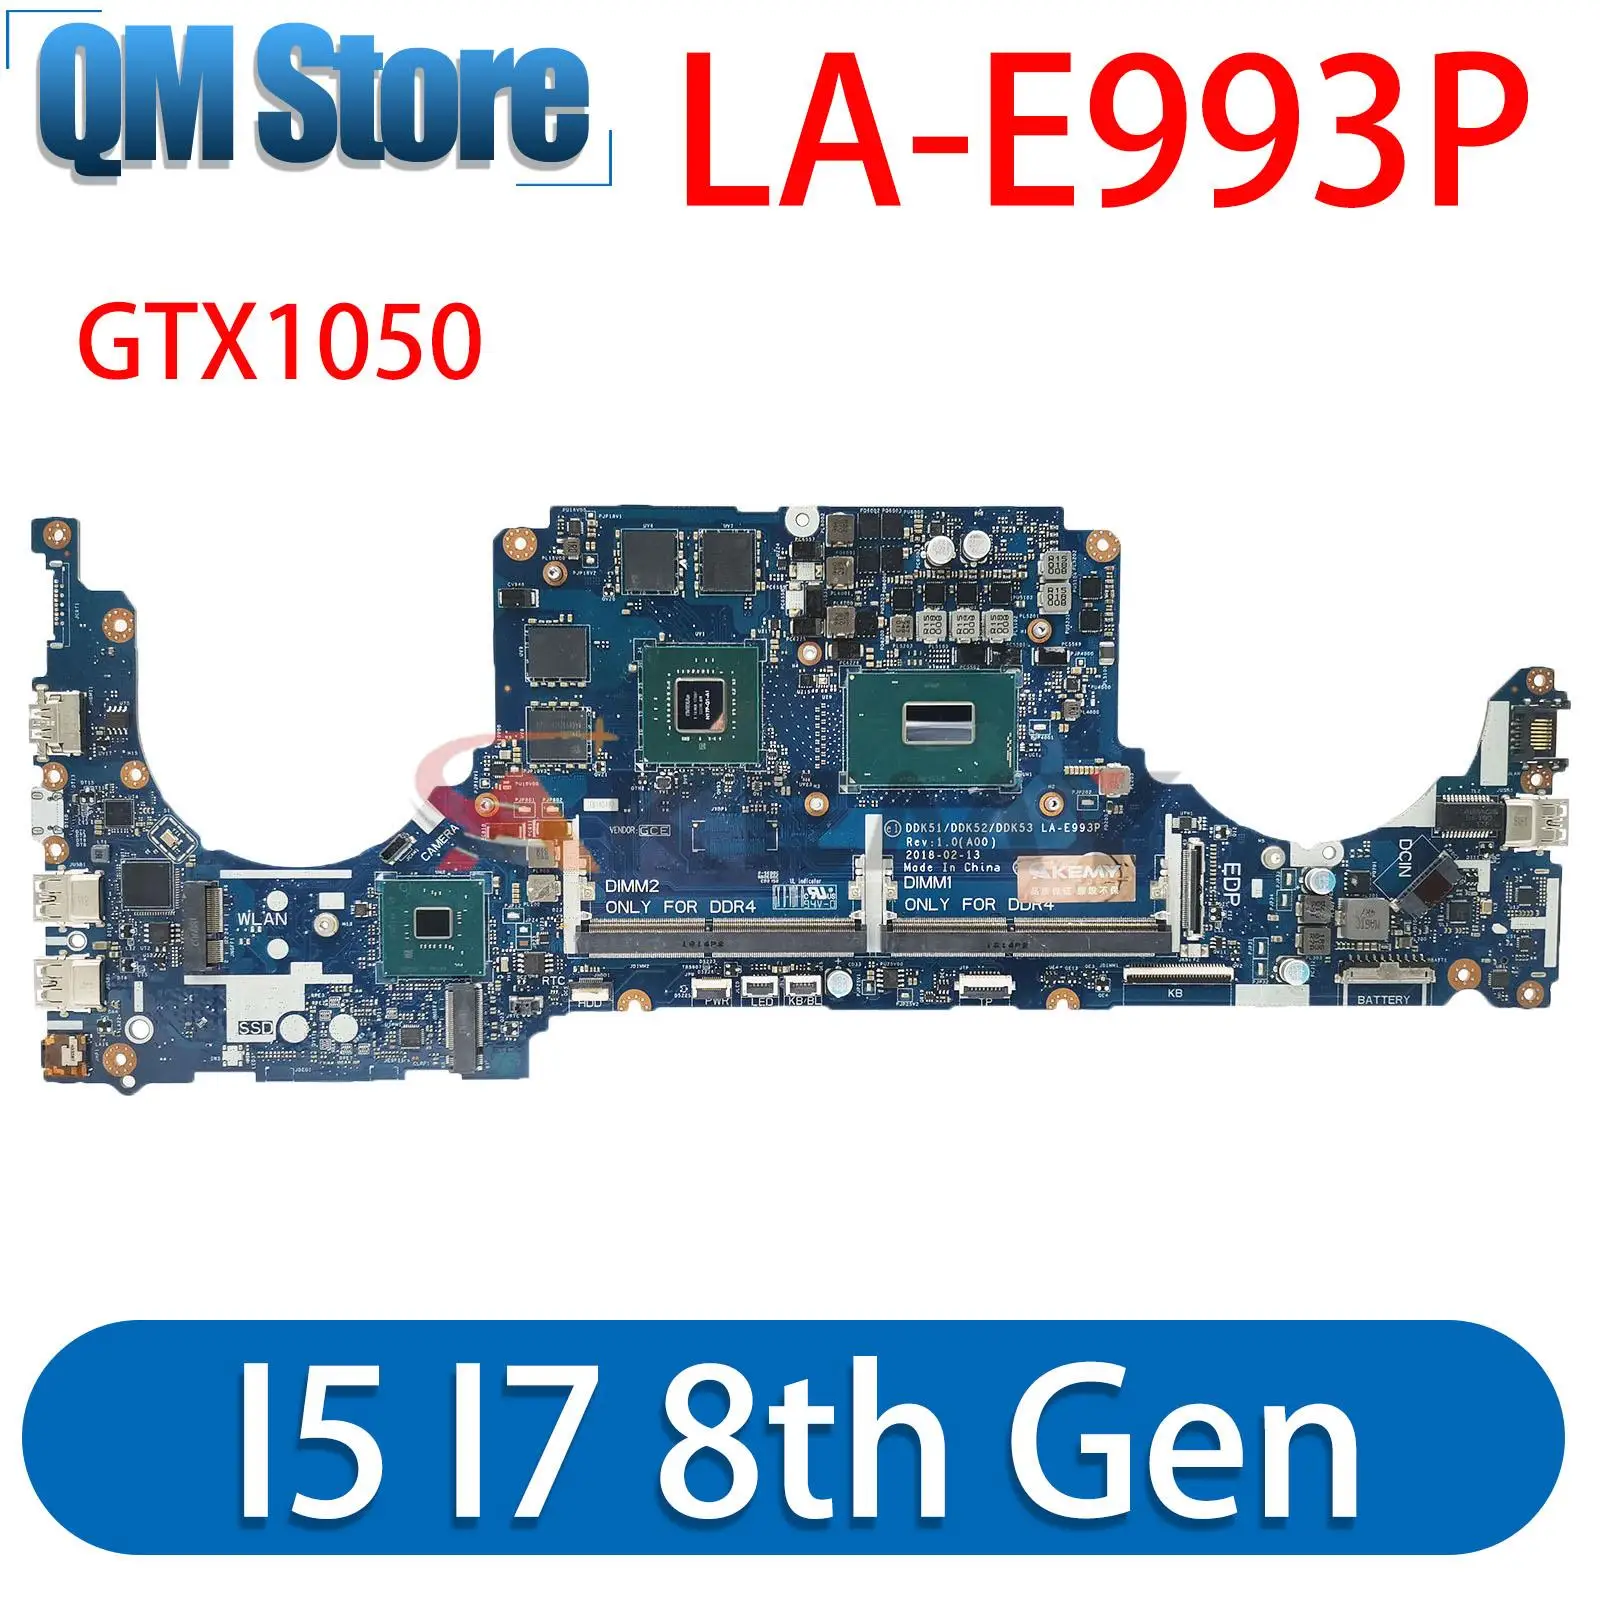 

For DELL G5 5587 G7 7588 7580 Inspiron 7577 7570 Notebook Mainboard LA-E993P with i5 i7 8th Gen CPU Motherboard GTX1050